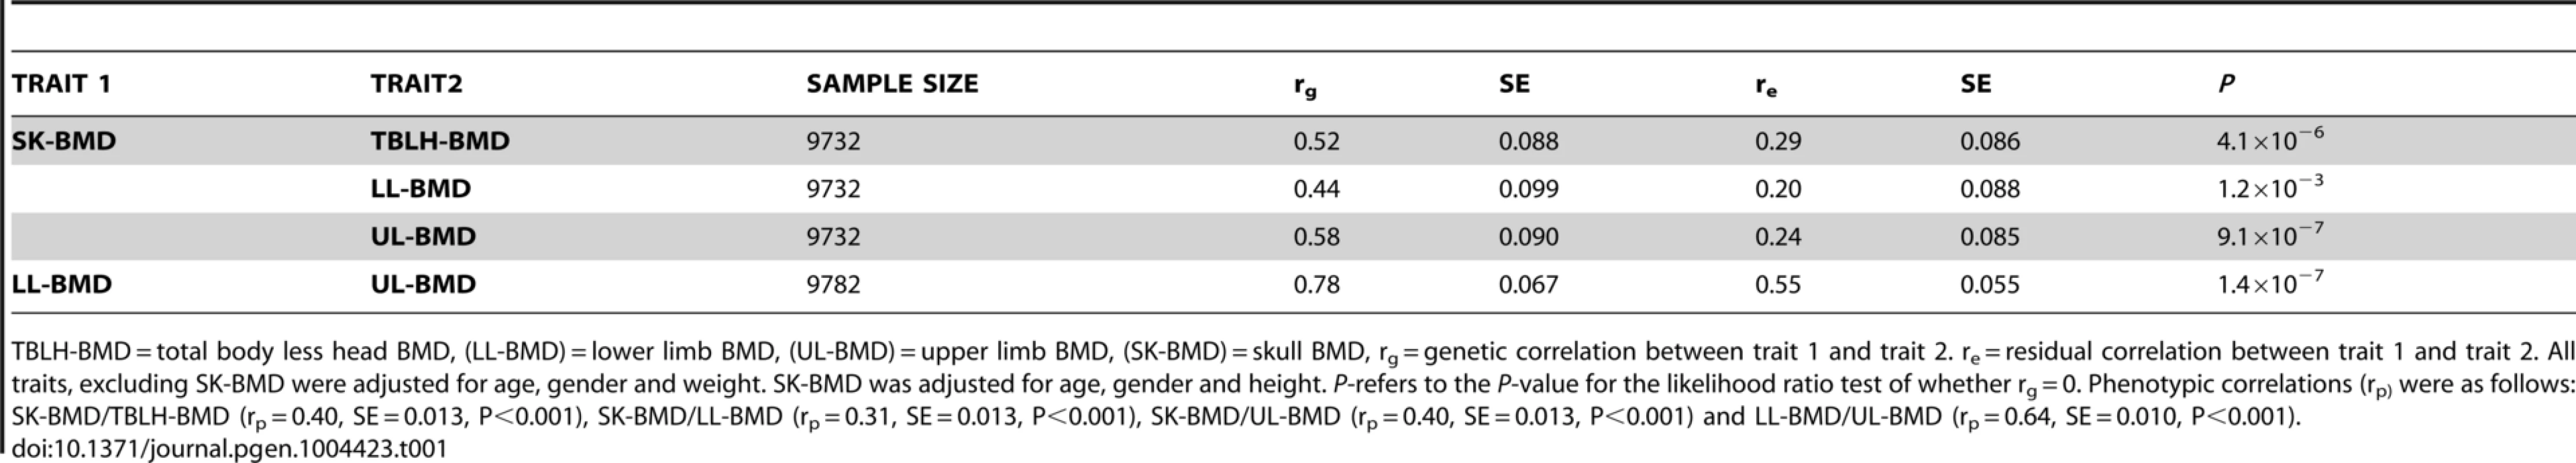 Bivariate GCTA estimates of the genetic and residual correlations for bone mineral density measurements at the total-body less head, lower limb, upper limb and skull for the ALSPAC cohort.